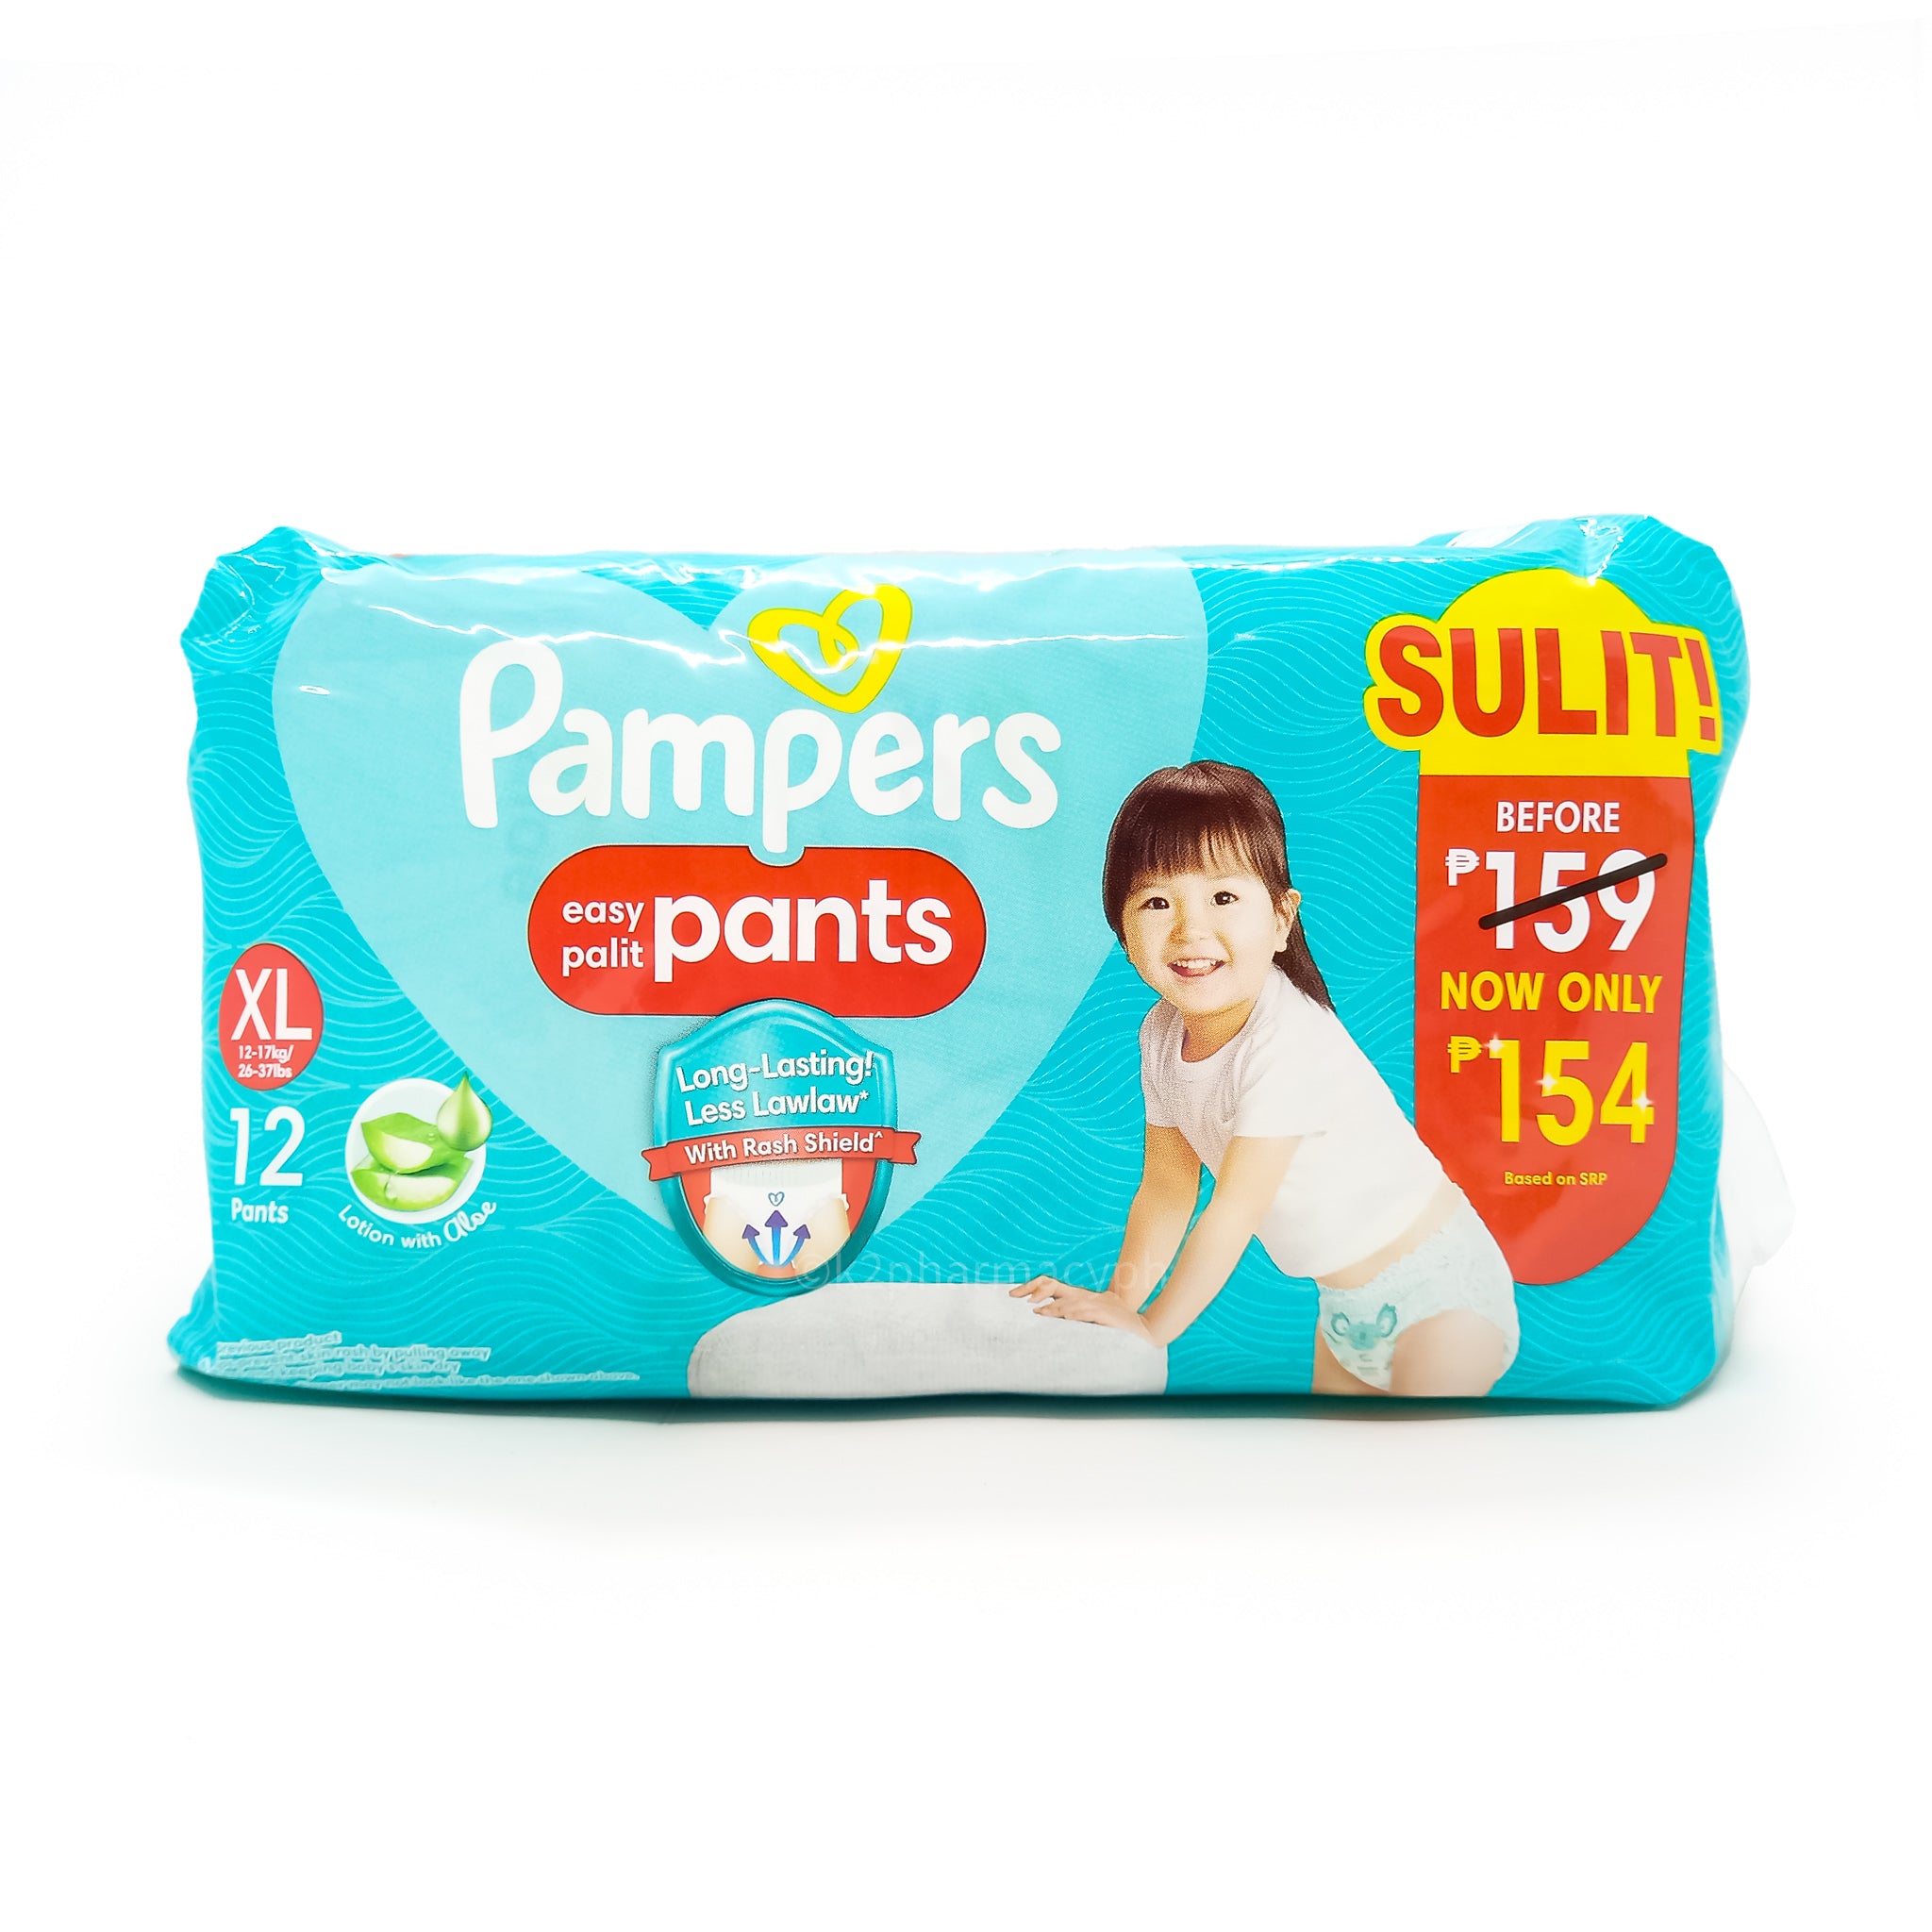 Pampers baby dry pants by Pampers : review - Diapering- Tryandreview.com